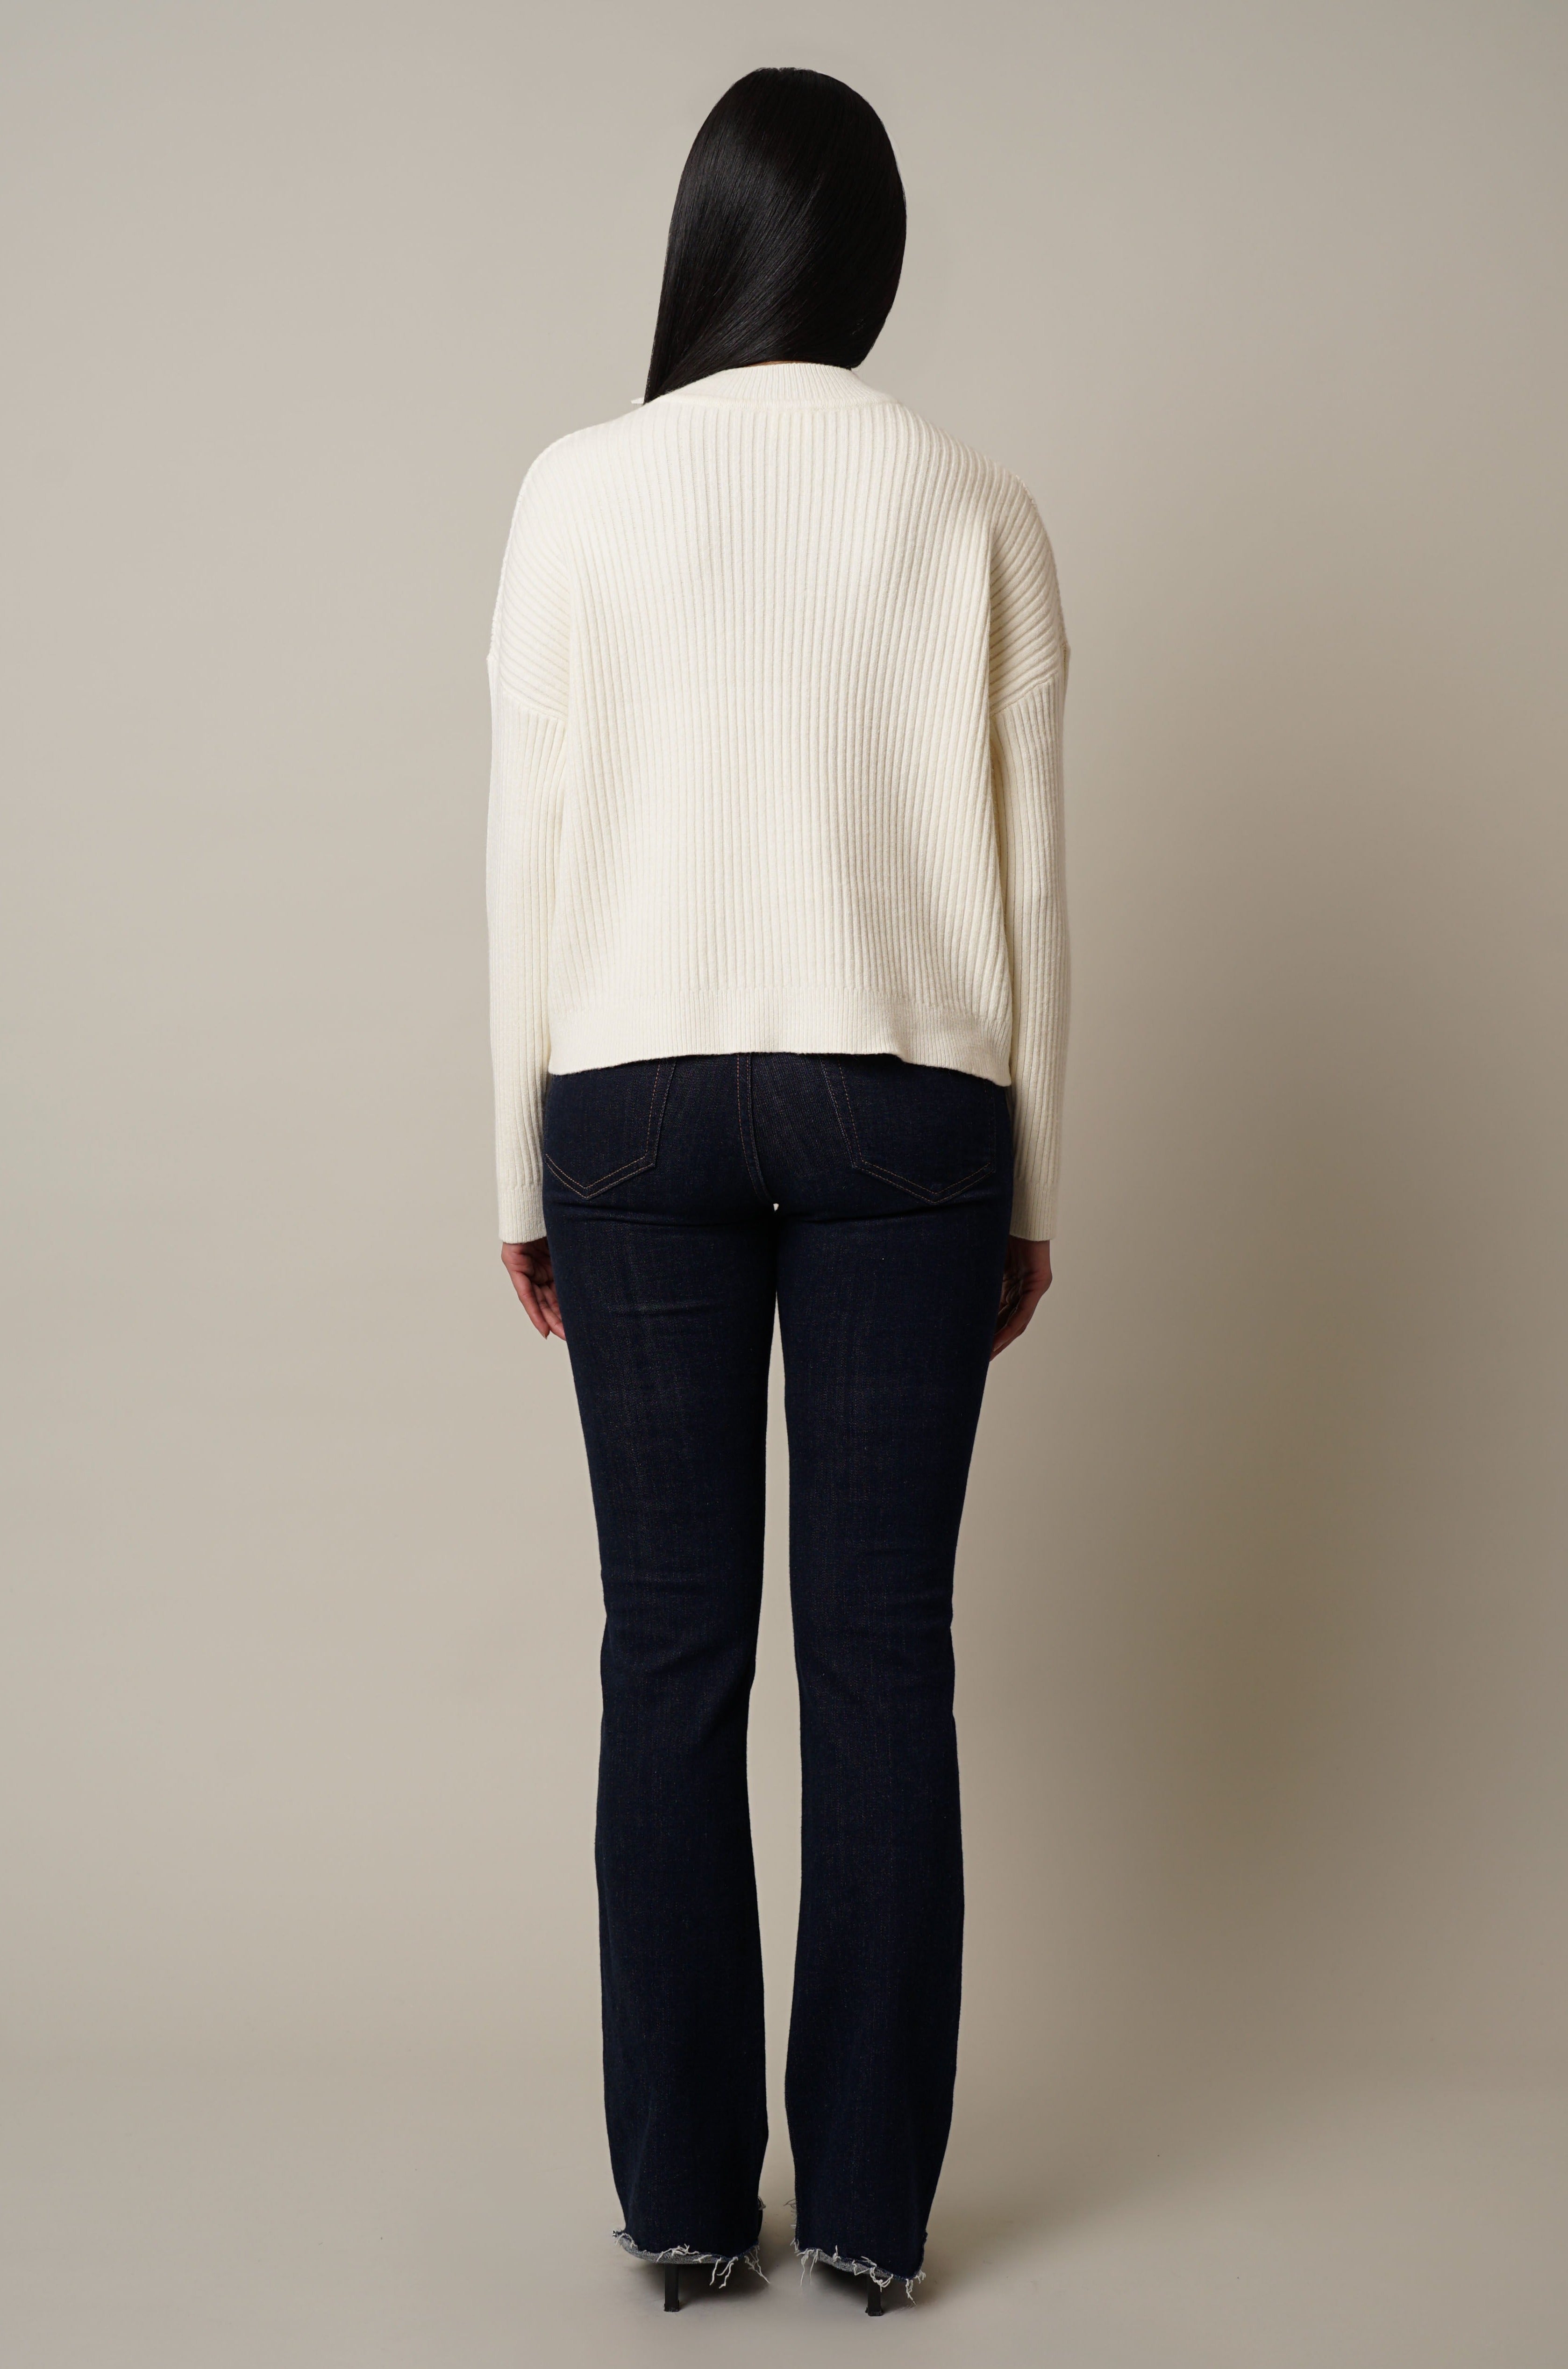 Cyrus - Mock Neck Cable Knit Pullover